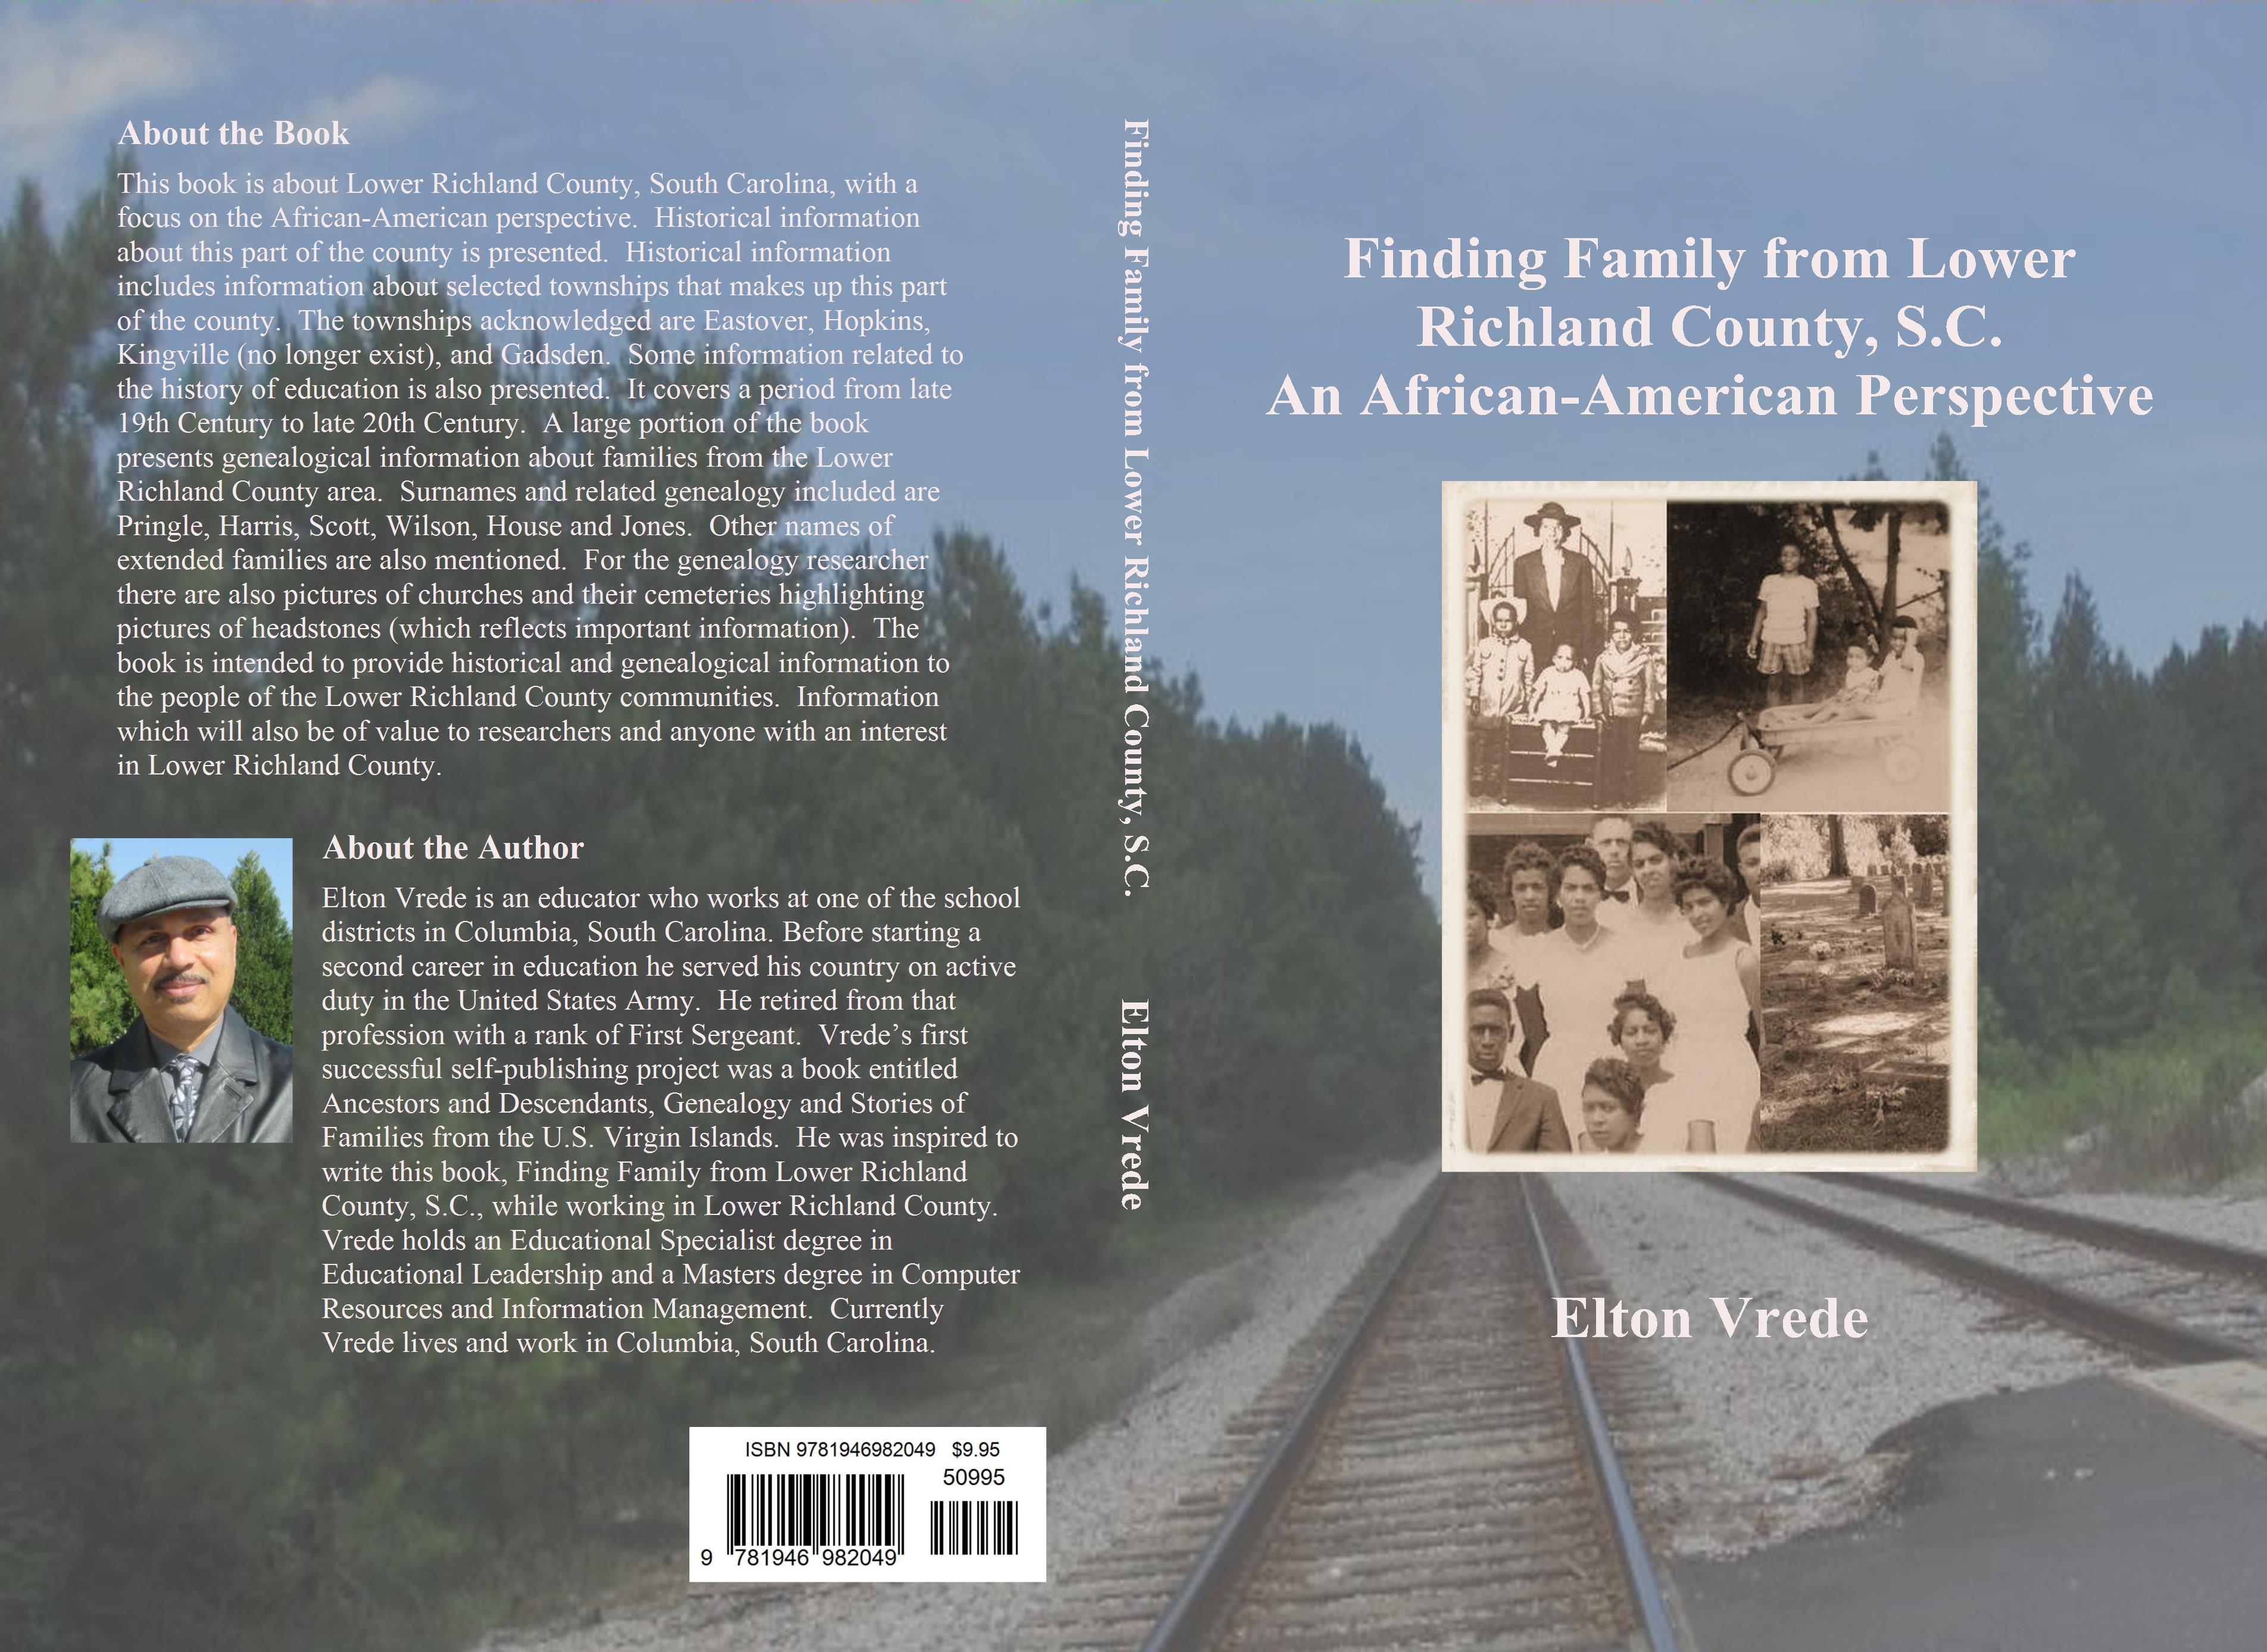 Finding Family from Lower Richland County, S.C. An African-American Perspective cover image